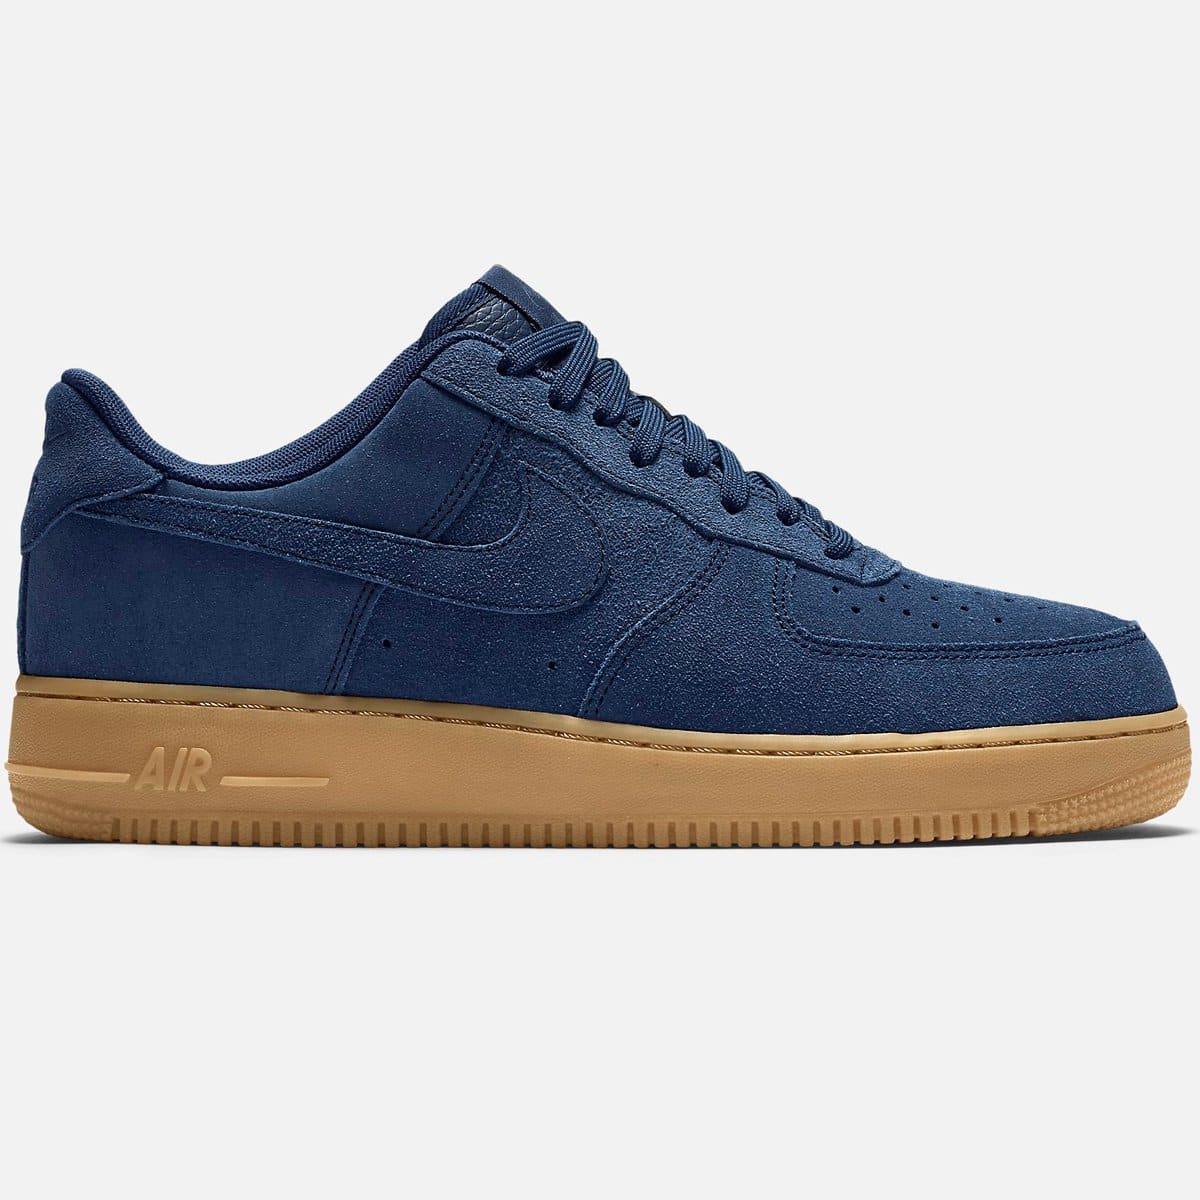 Nike Air Force 1 Low - Great Buys Sneakers July 2016 | Sole Collector